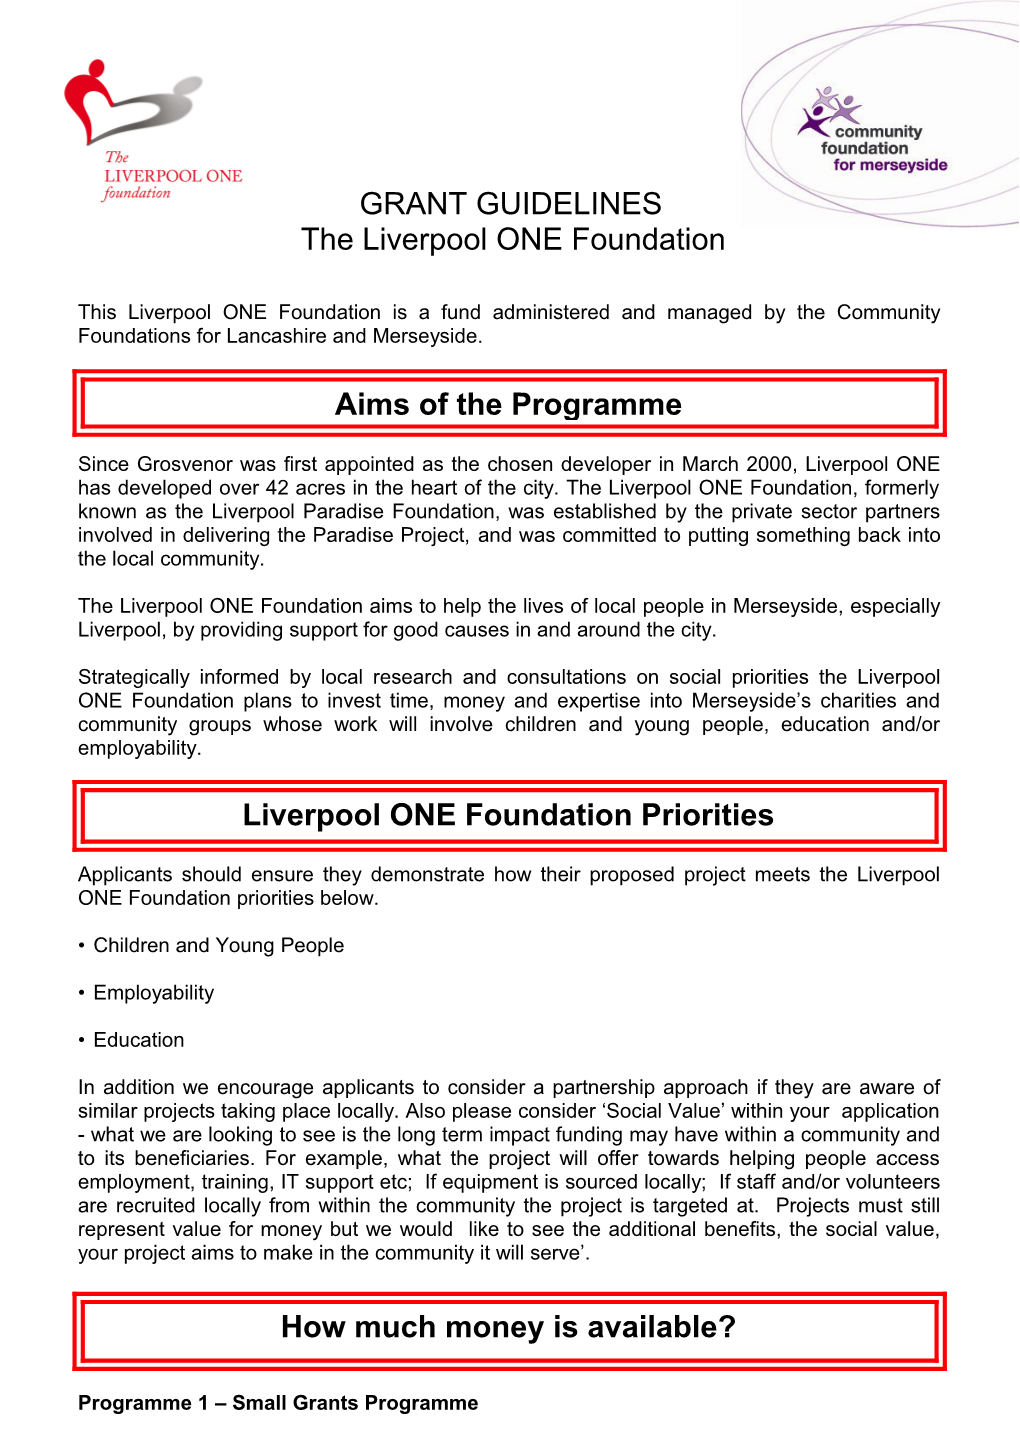 The Liverpool ONE Foundation